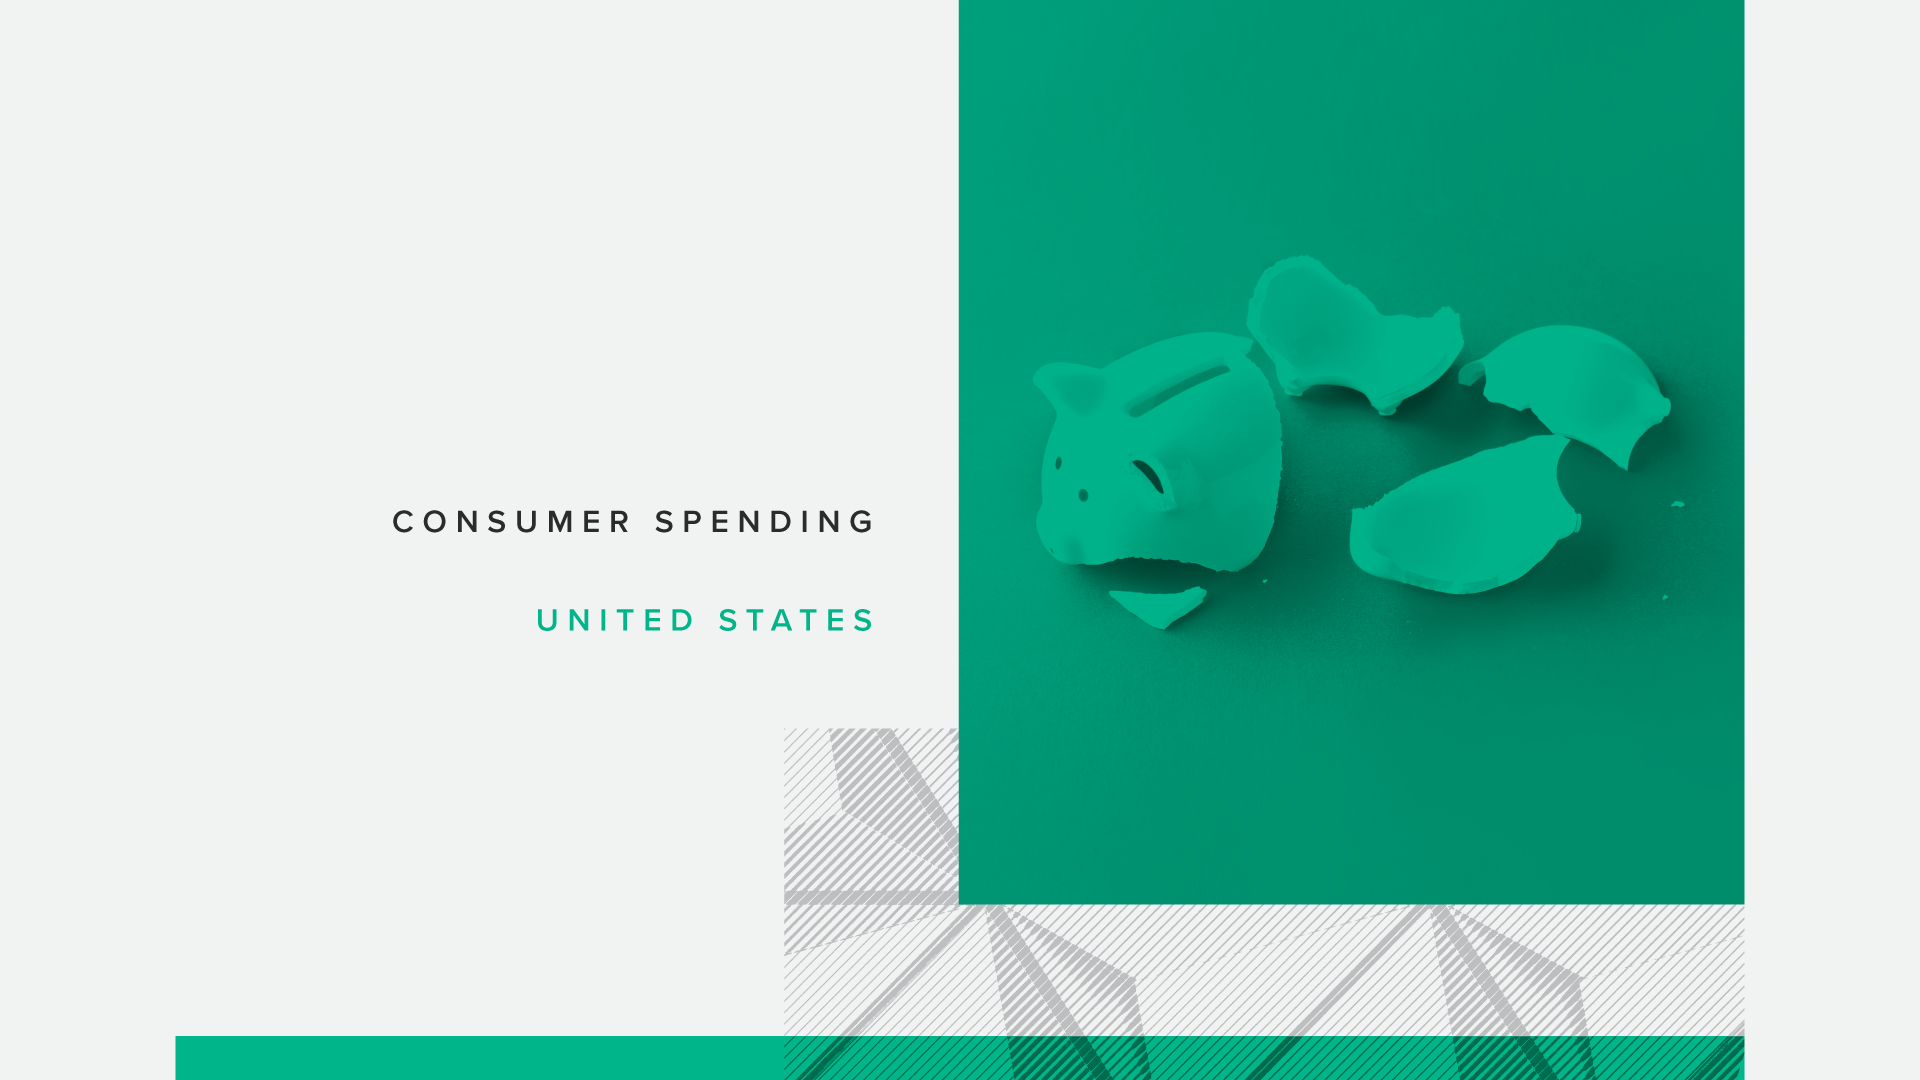 Graphic conveying consumer spending and inflation trends in the U.S.